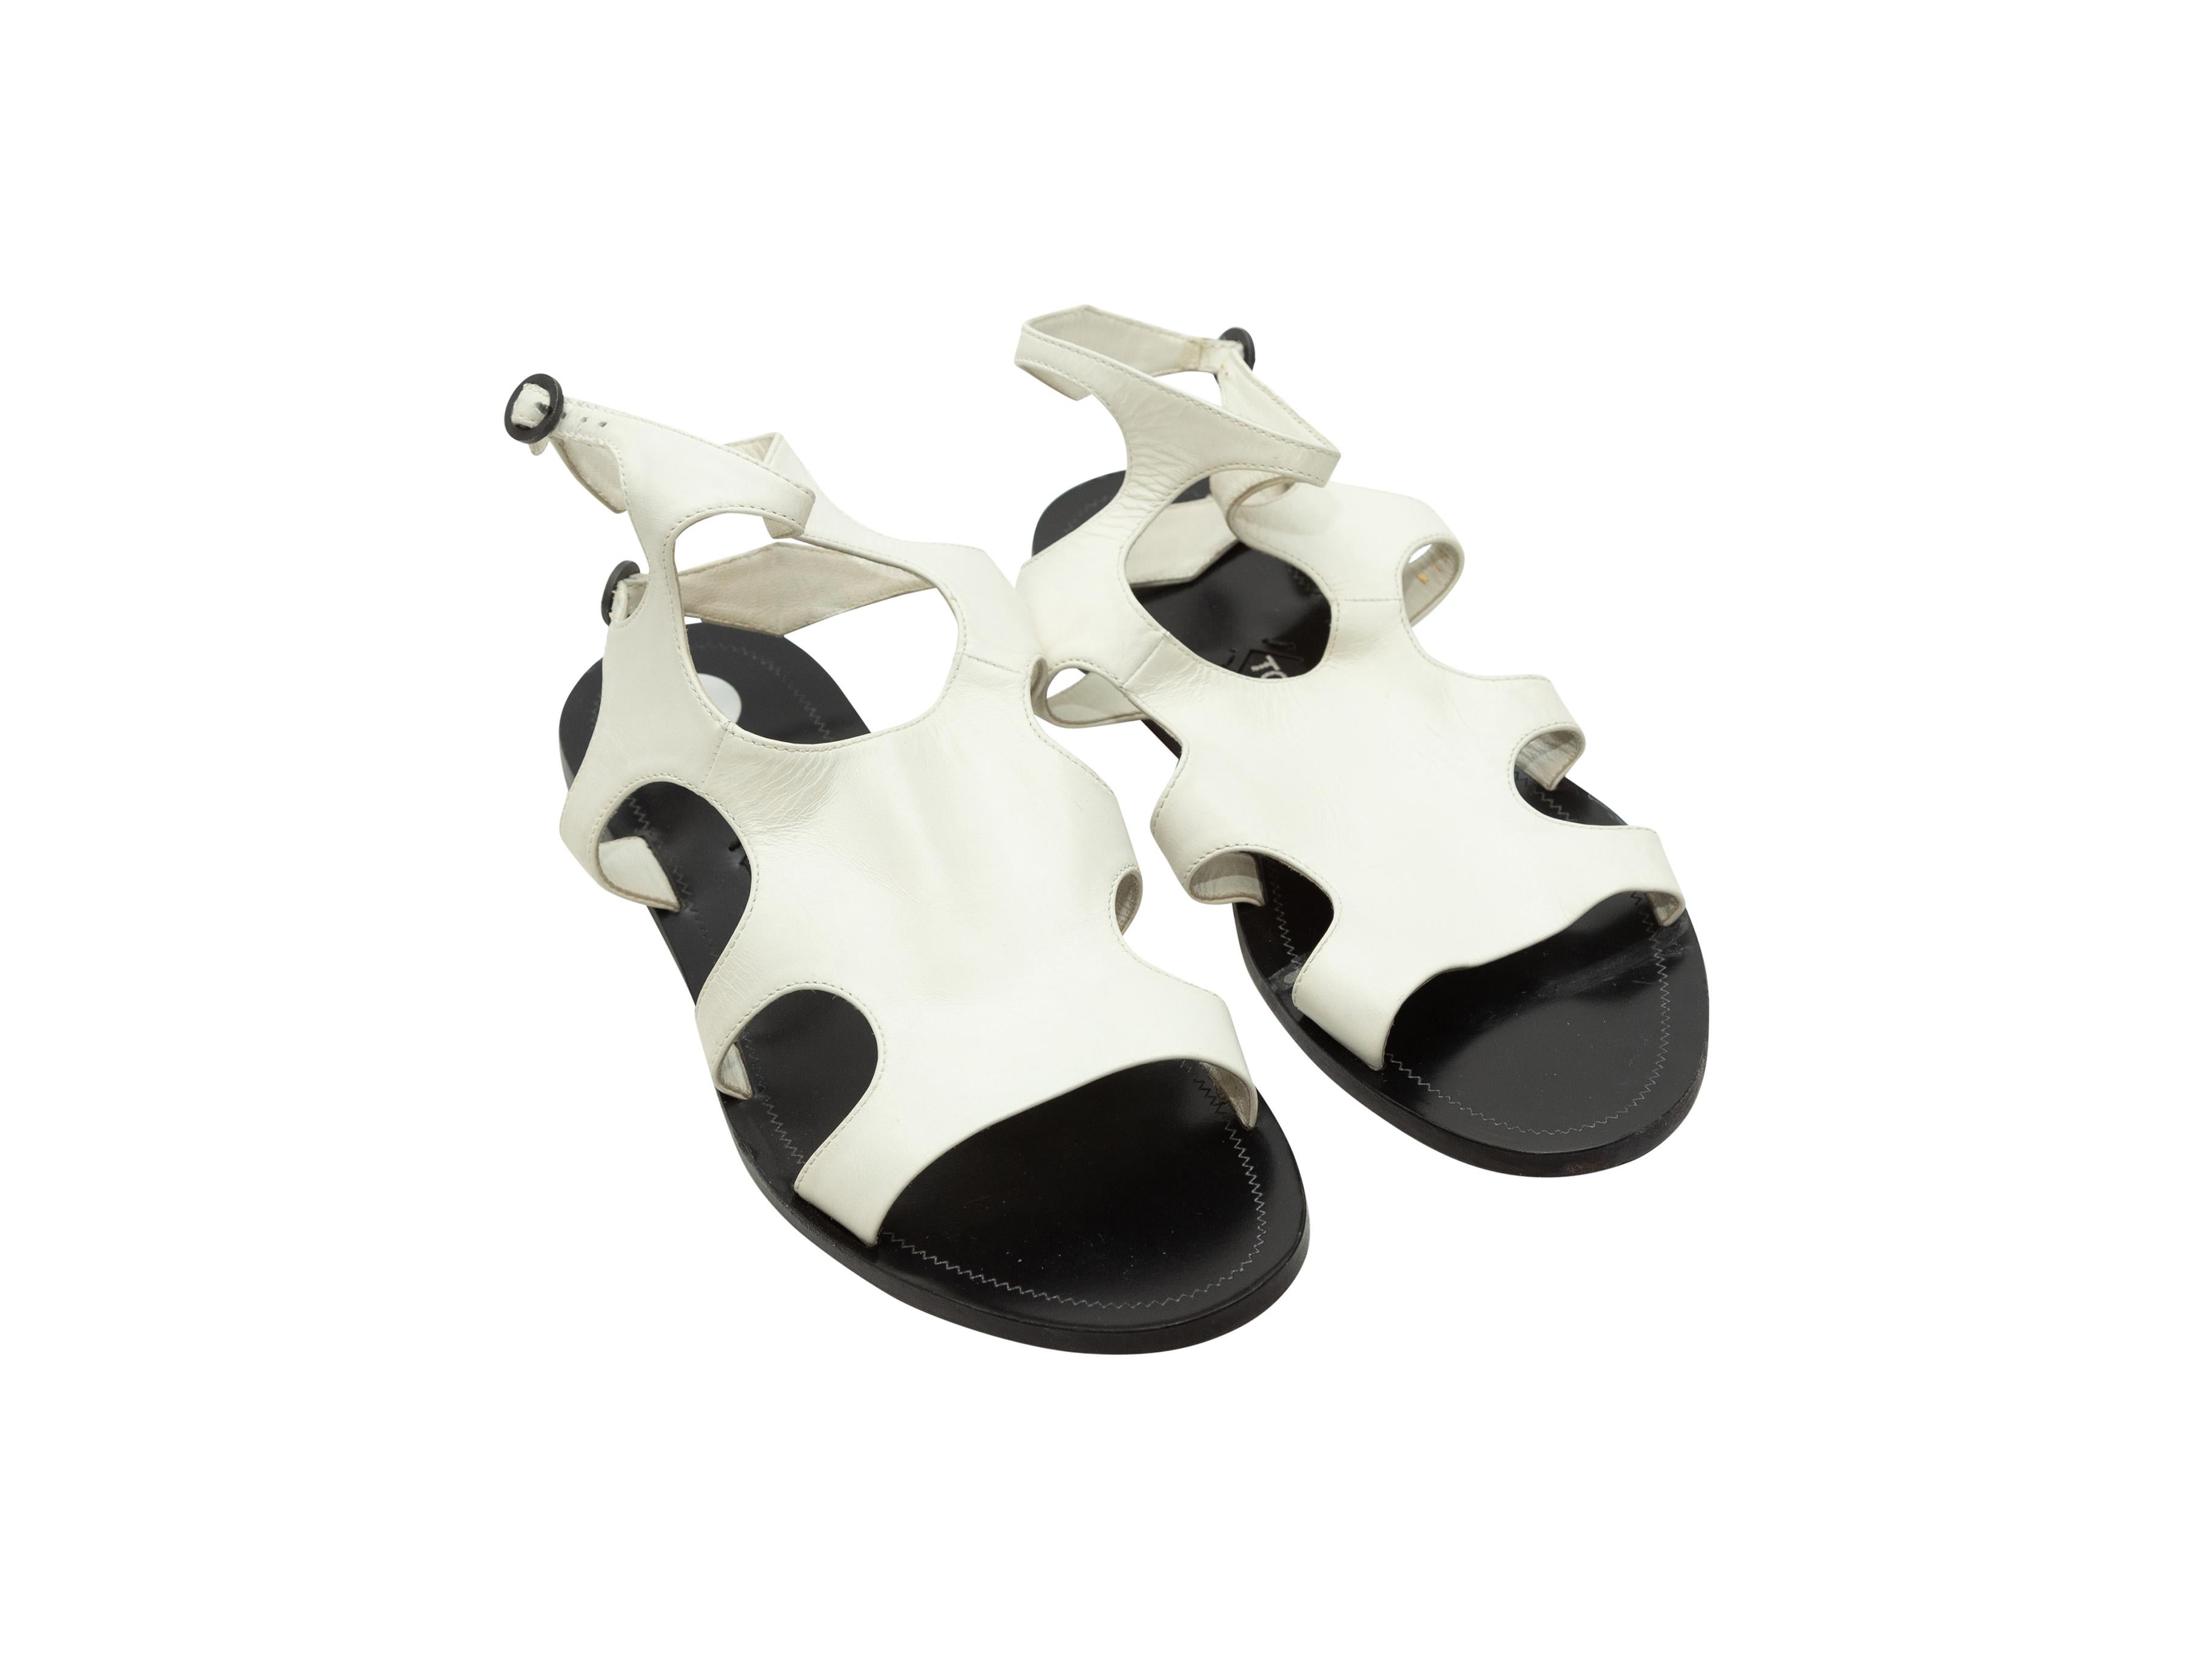 Product details: White leather cutout sandals by Tom Ford. Dual buckle closures at ankle straps. Designer size 39.
Condition: Pre-owned. Very good. Faint wear at soles.
Est. Retail $ 695.00